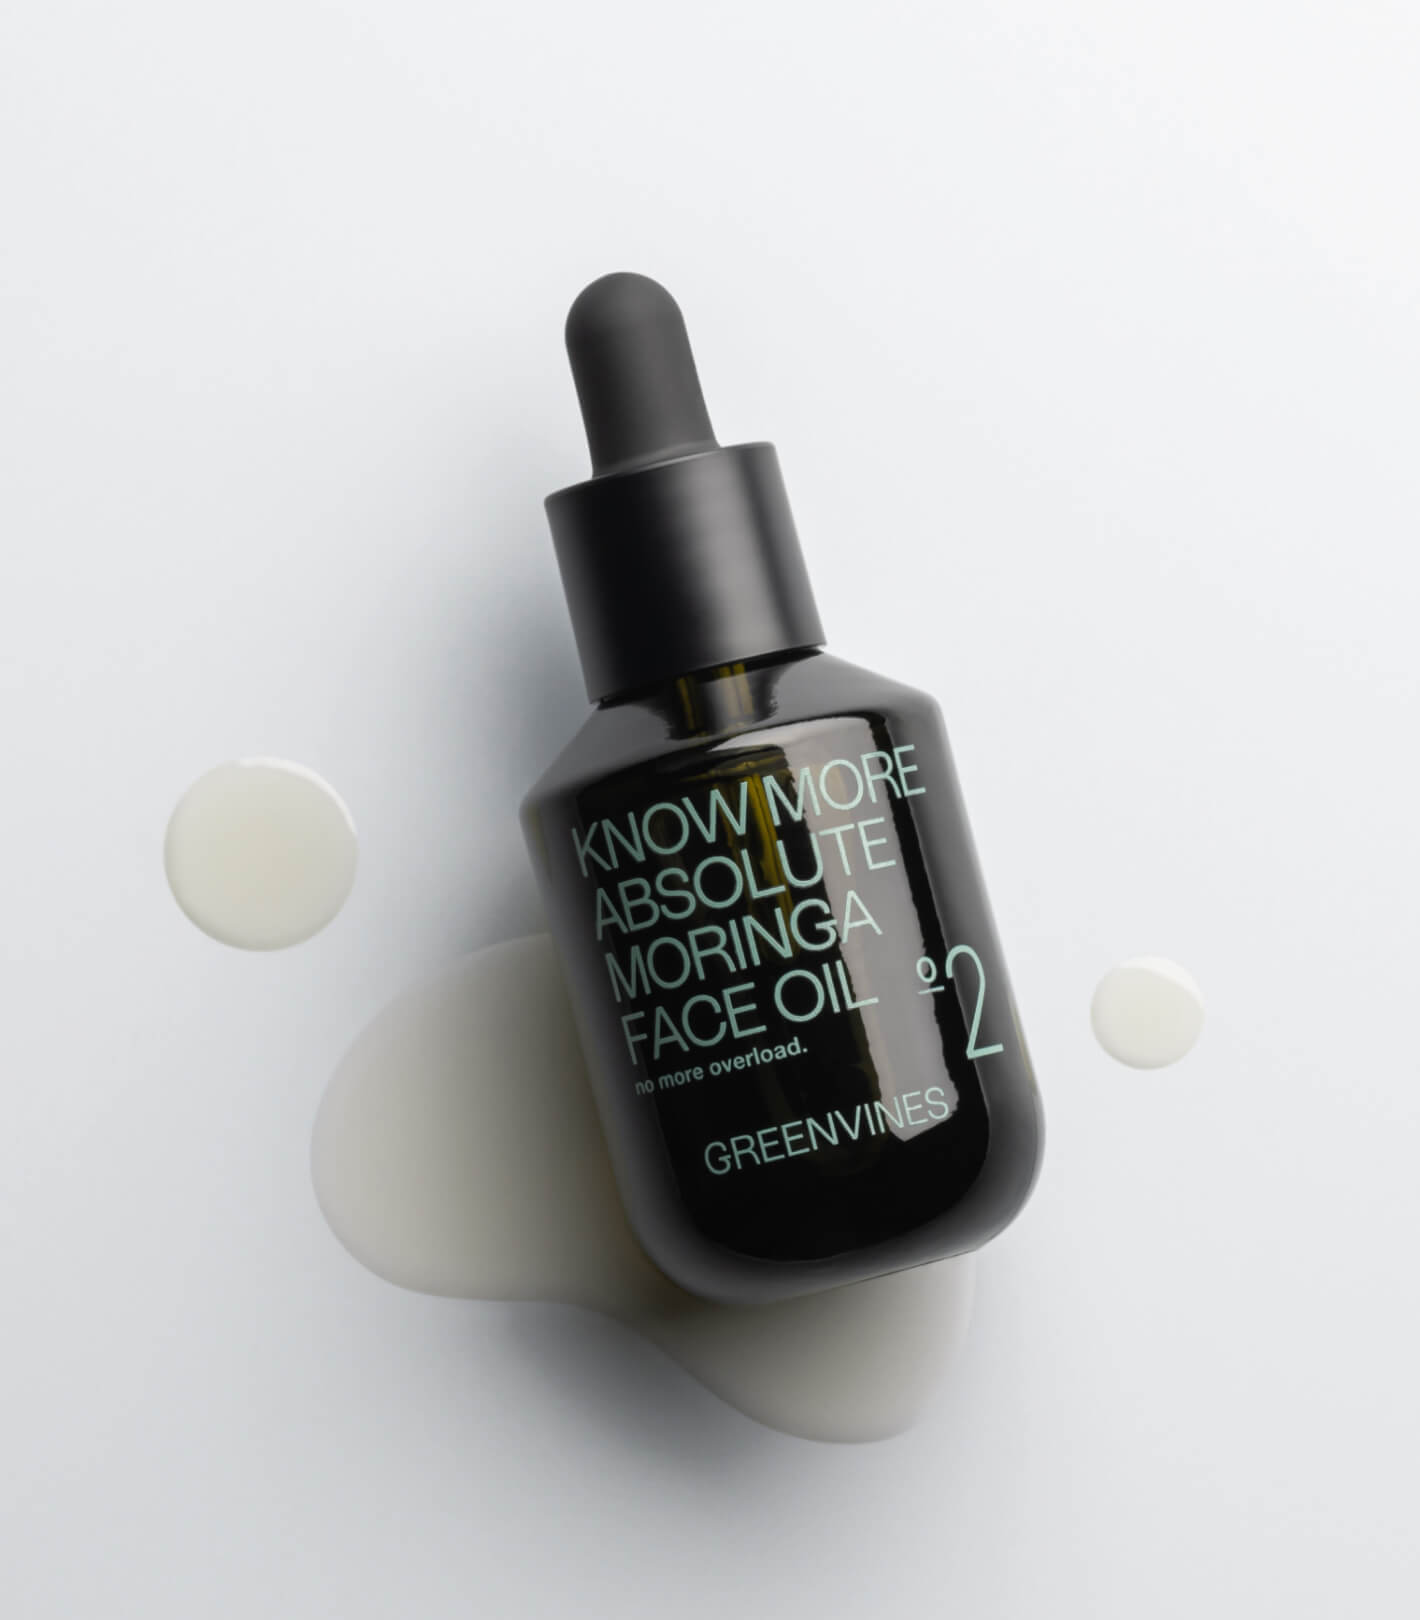 Know More Absolute Moringa Face Oil – Greenvines